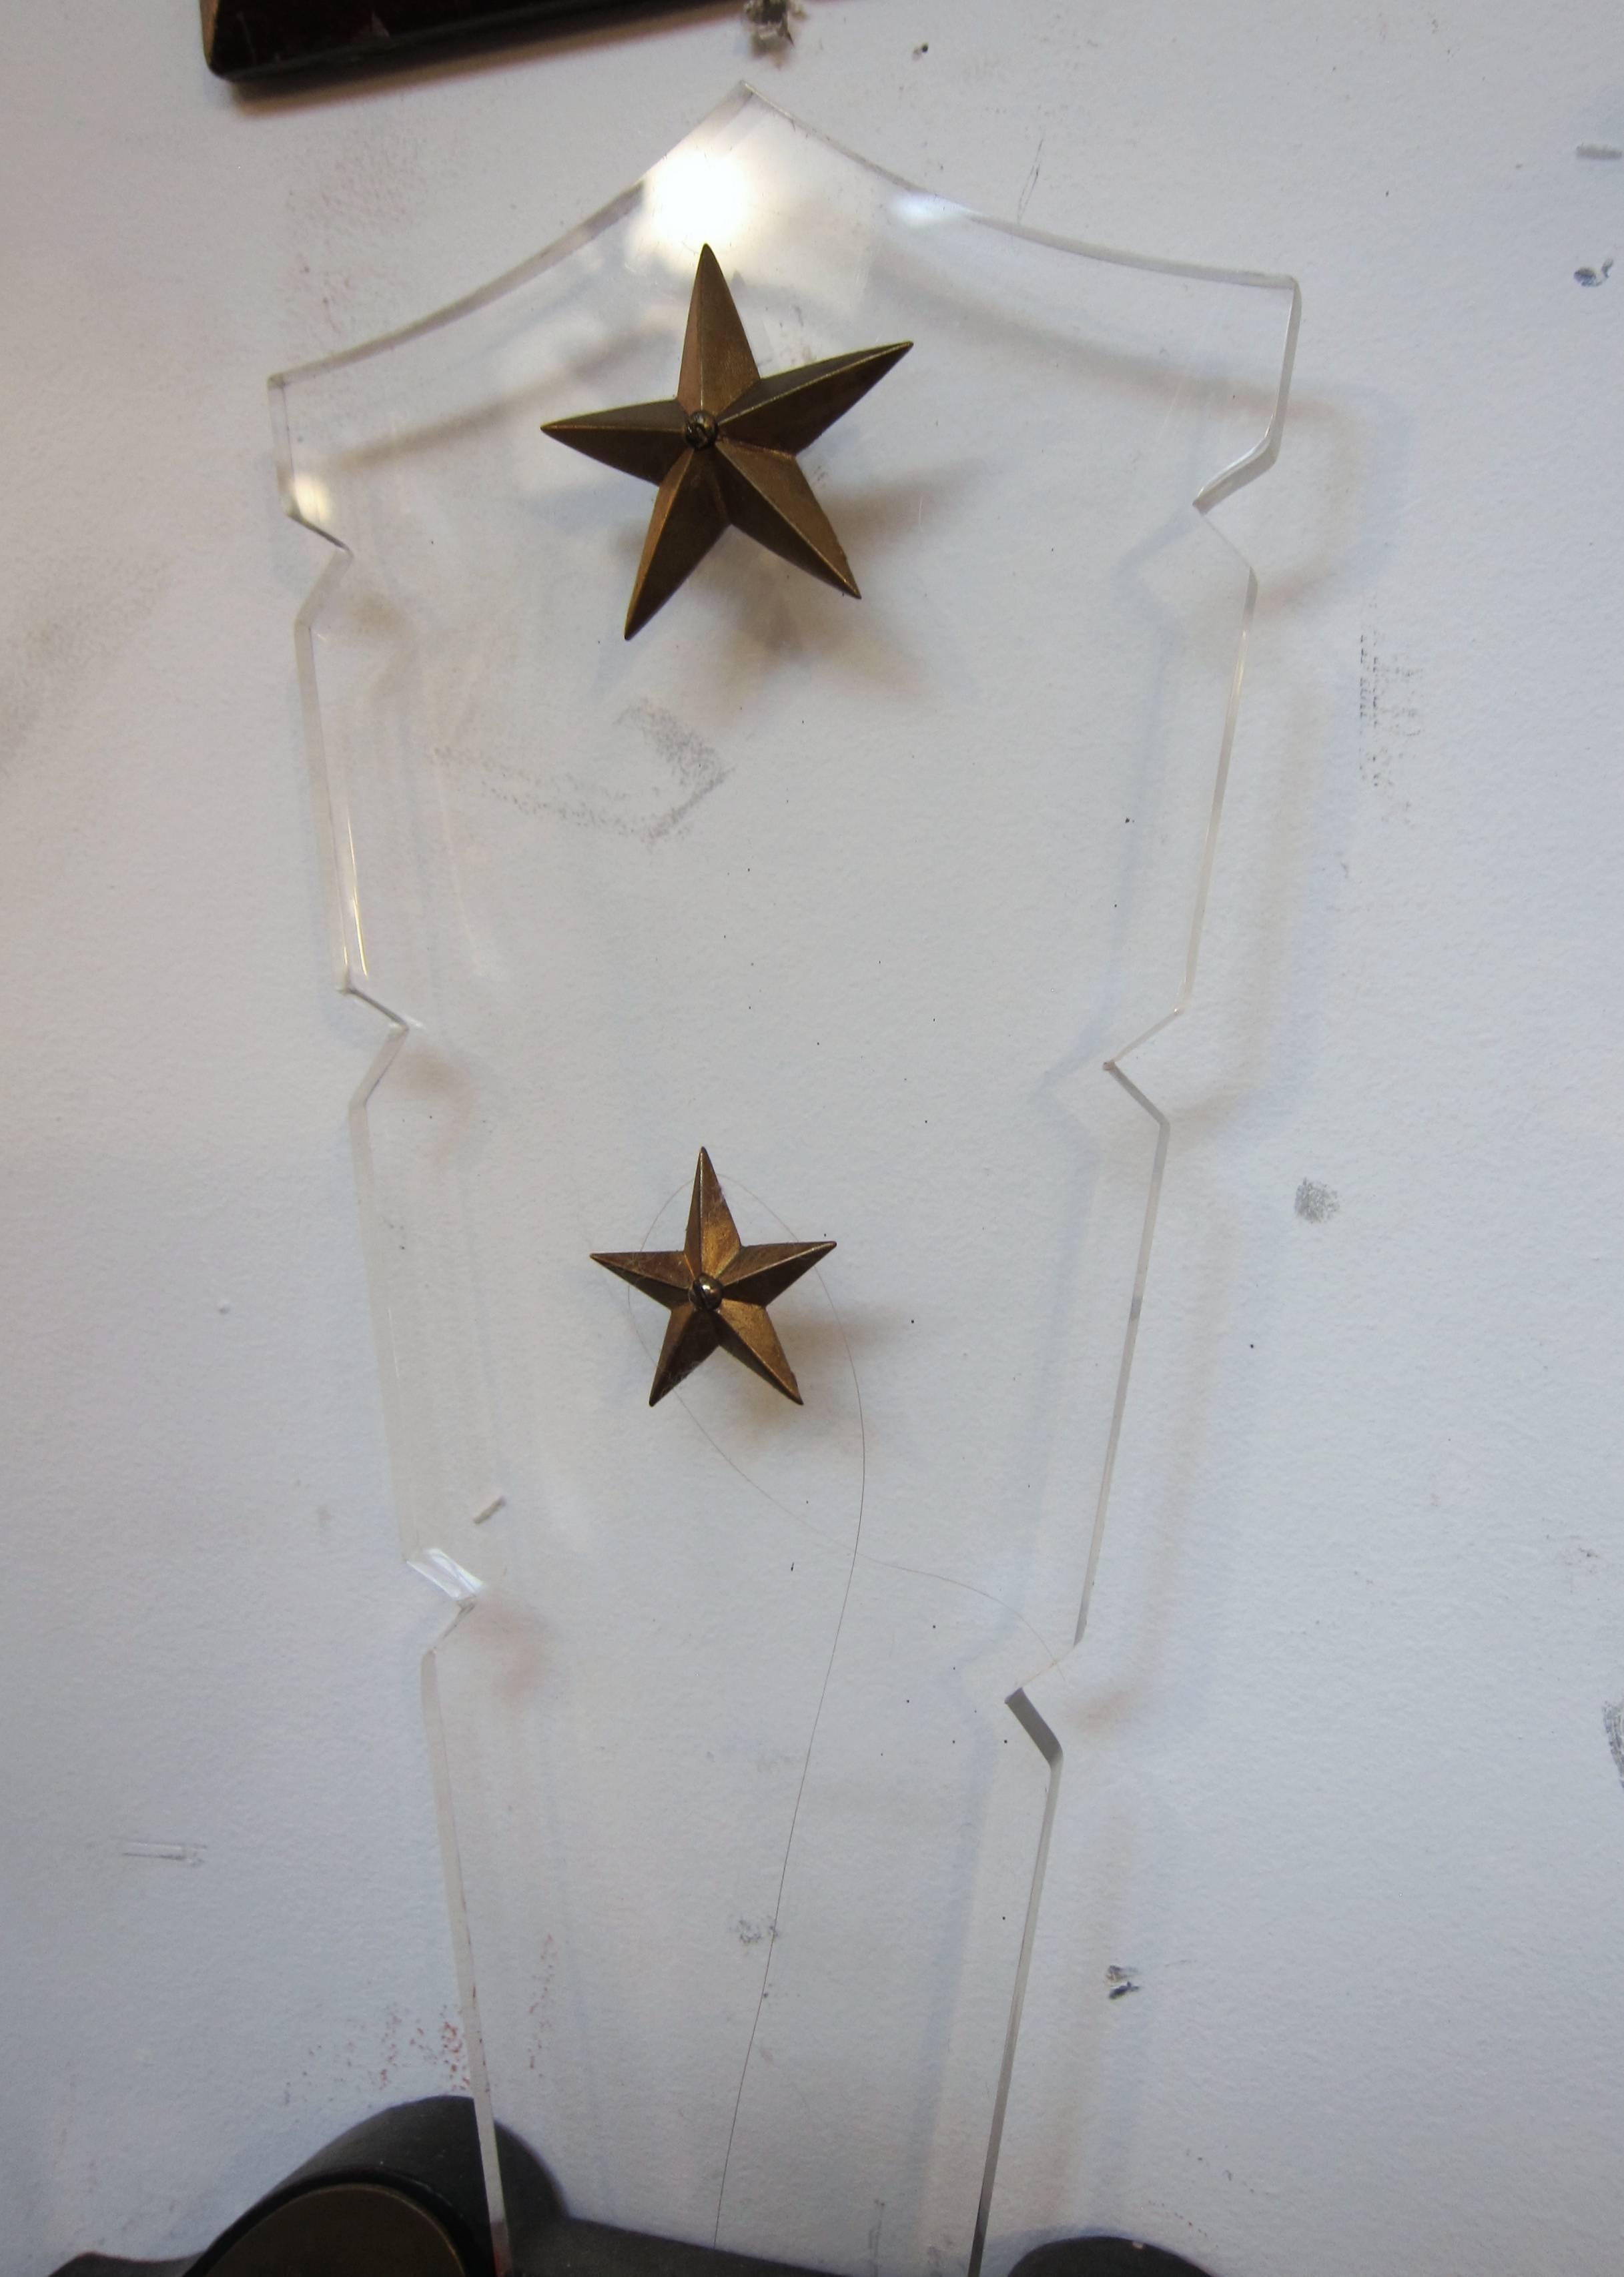 1940s pair of French Art Deco sconces with gilt, plexiglas and applied stars.
These can be viewed at our 5 East 16th Street Union Square location.